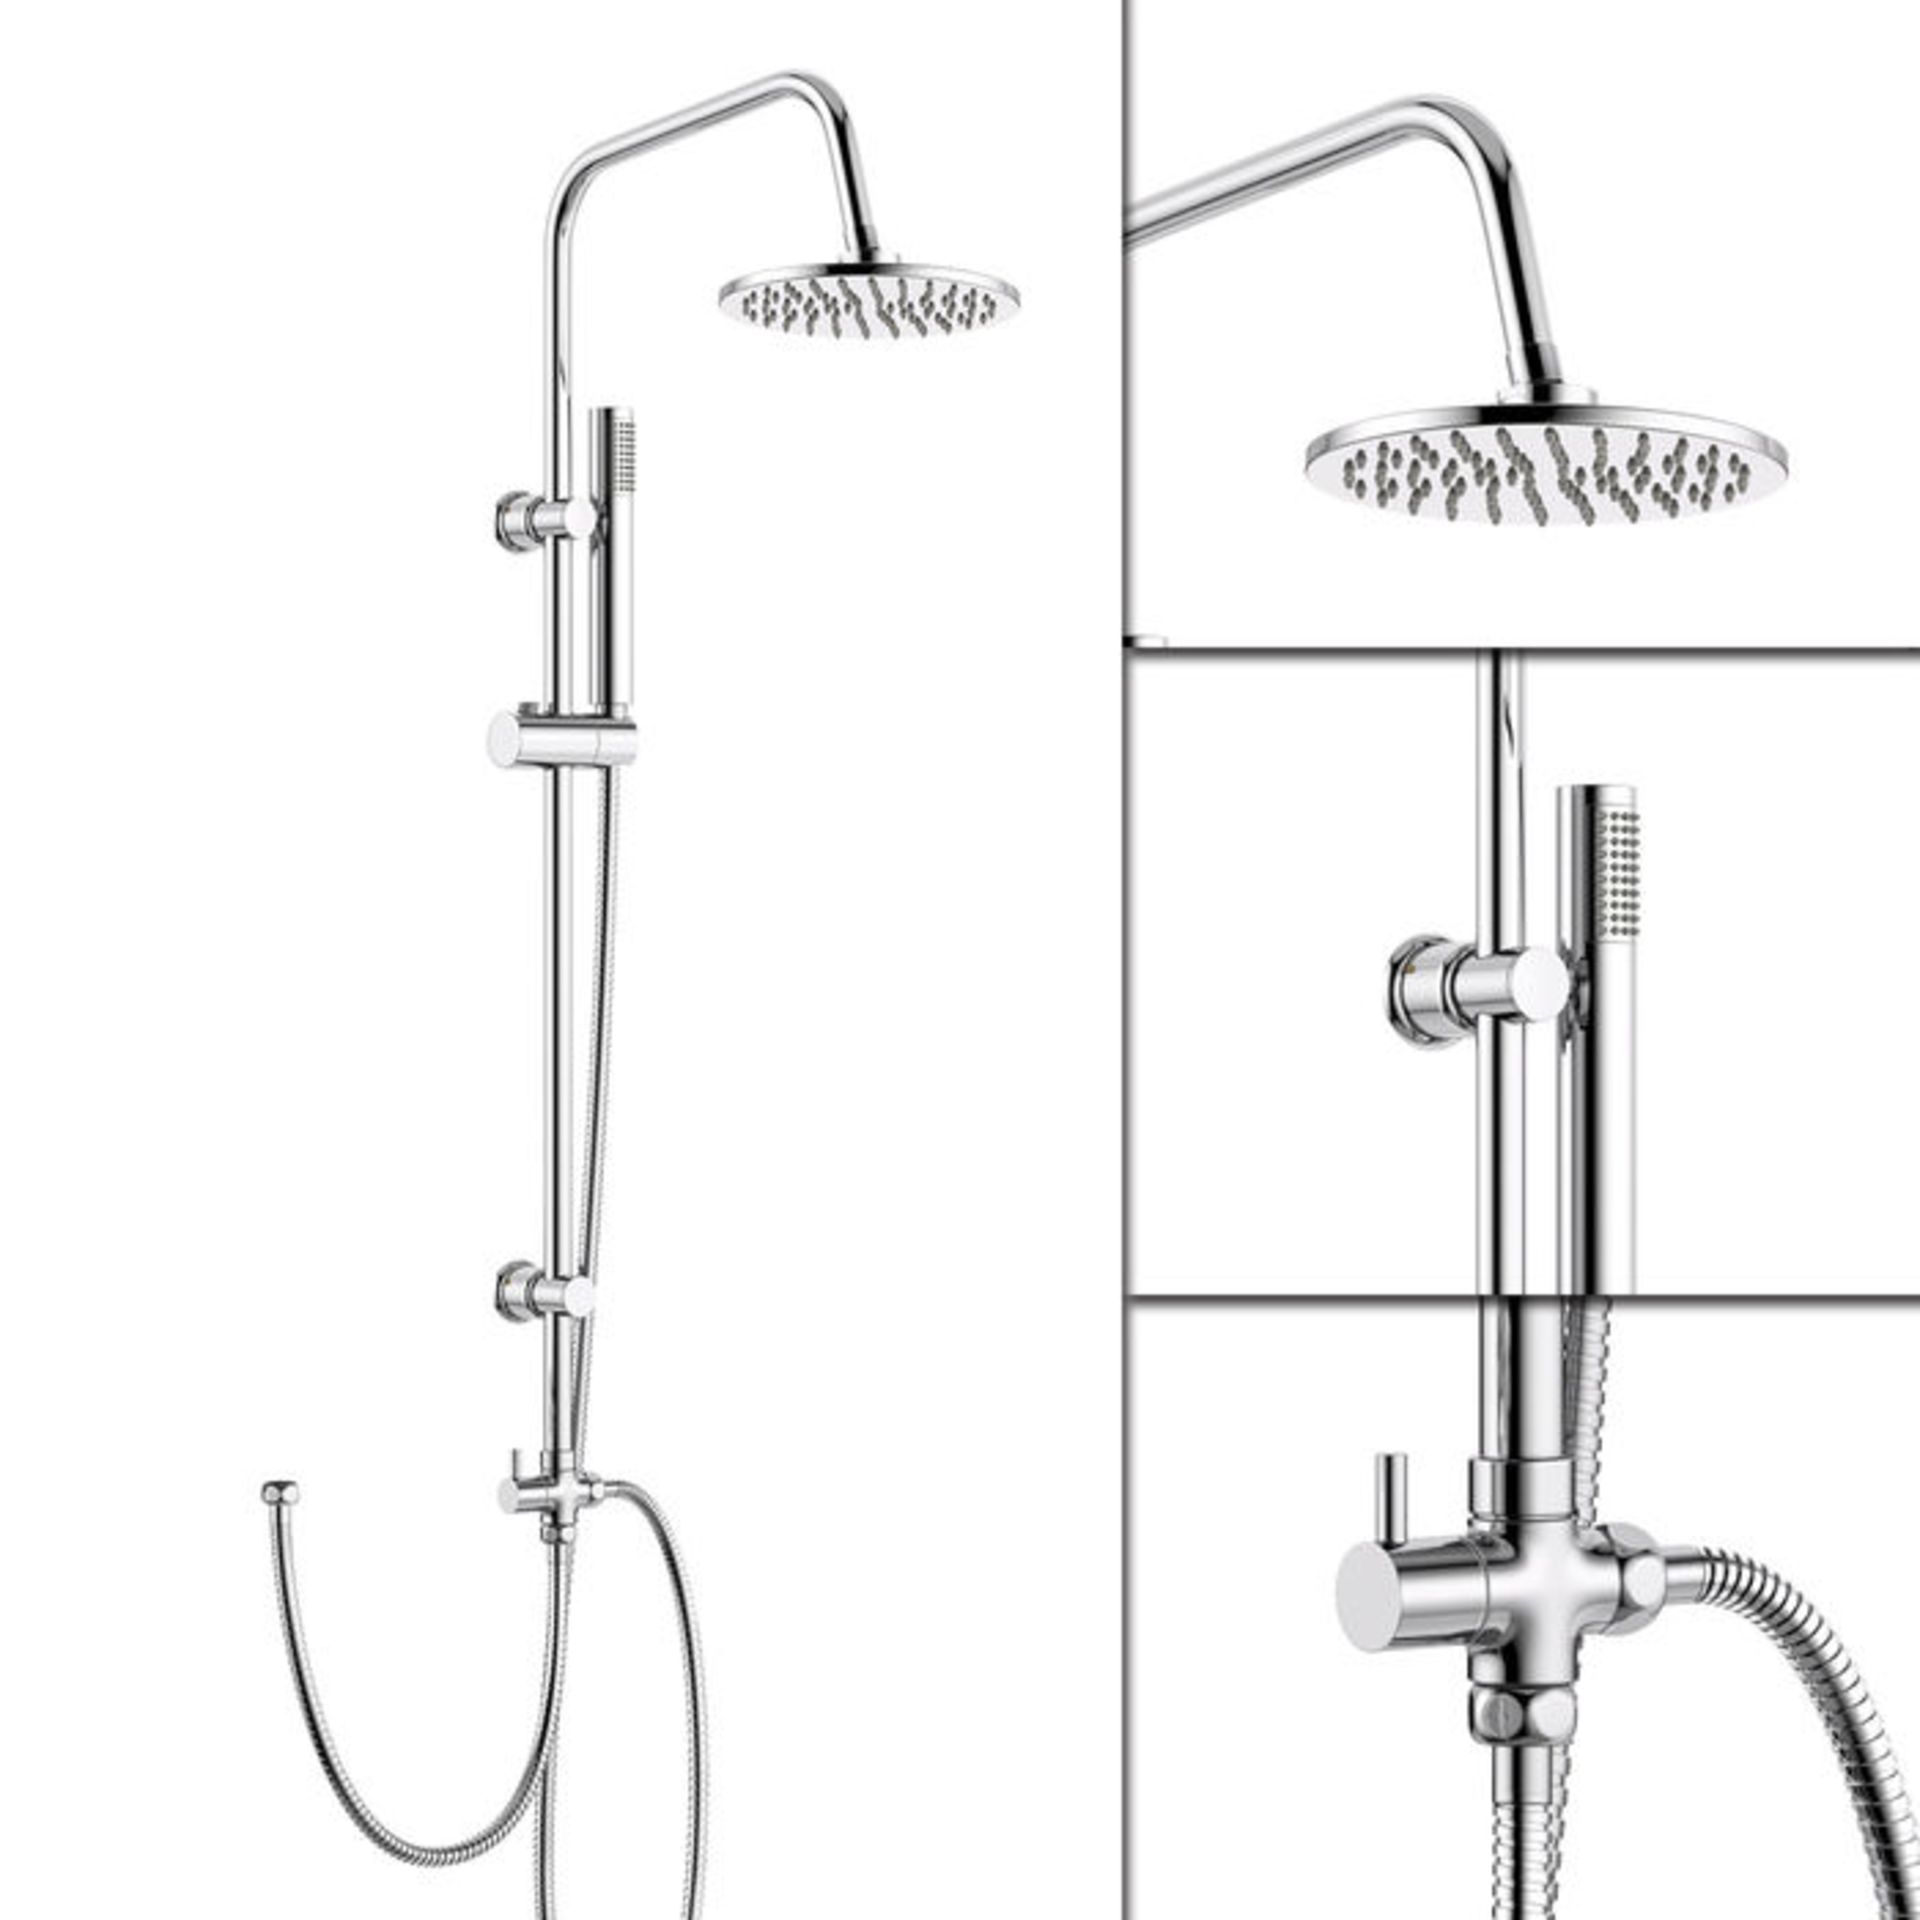 (HS39) 200mm Round Head, Riser Rail & Handheld Kit. Quality stainless steel shower head with Easy - Image 3 of 3